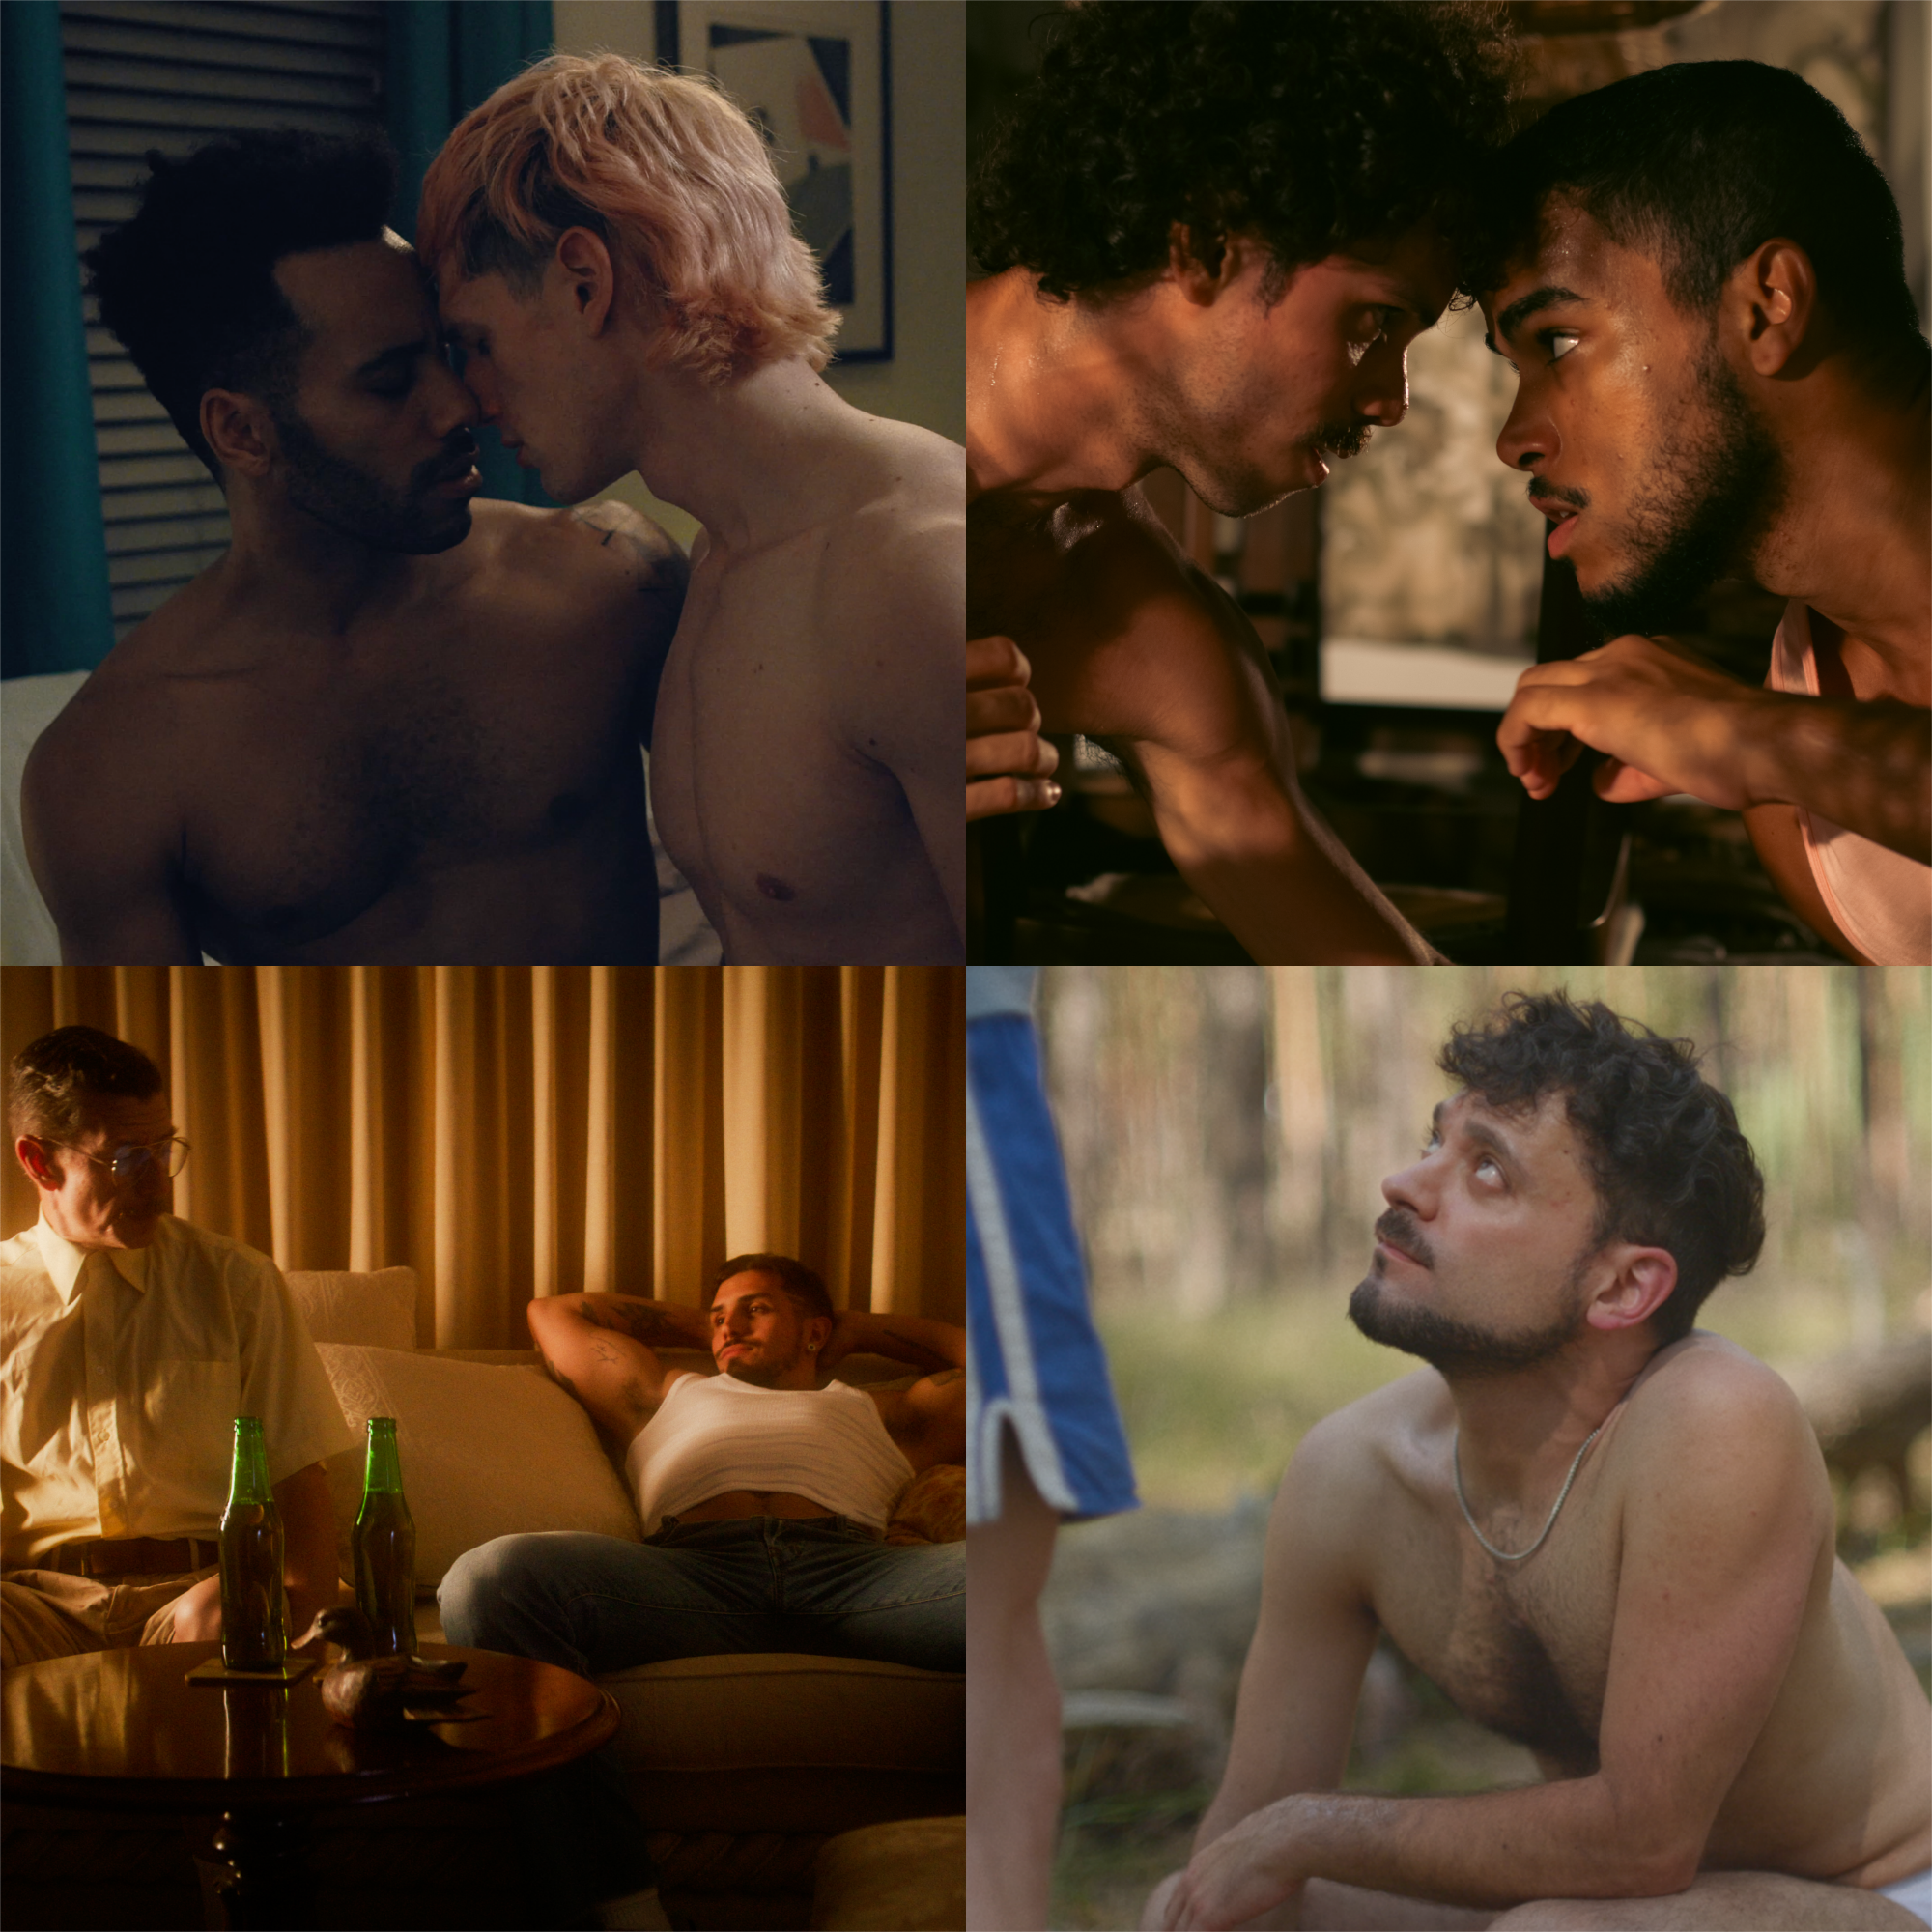 A collage of images: two shirtless men about to kiss, two sweaty men looking into each other's eyes intensely, a man lying back seductively on a couch looking at another more timid man, and a man in his underwear kneeling looking up at another man.